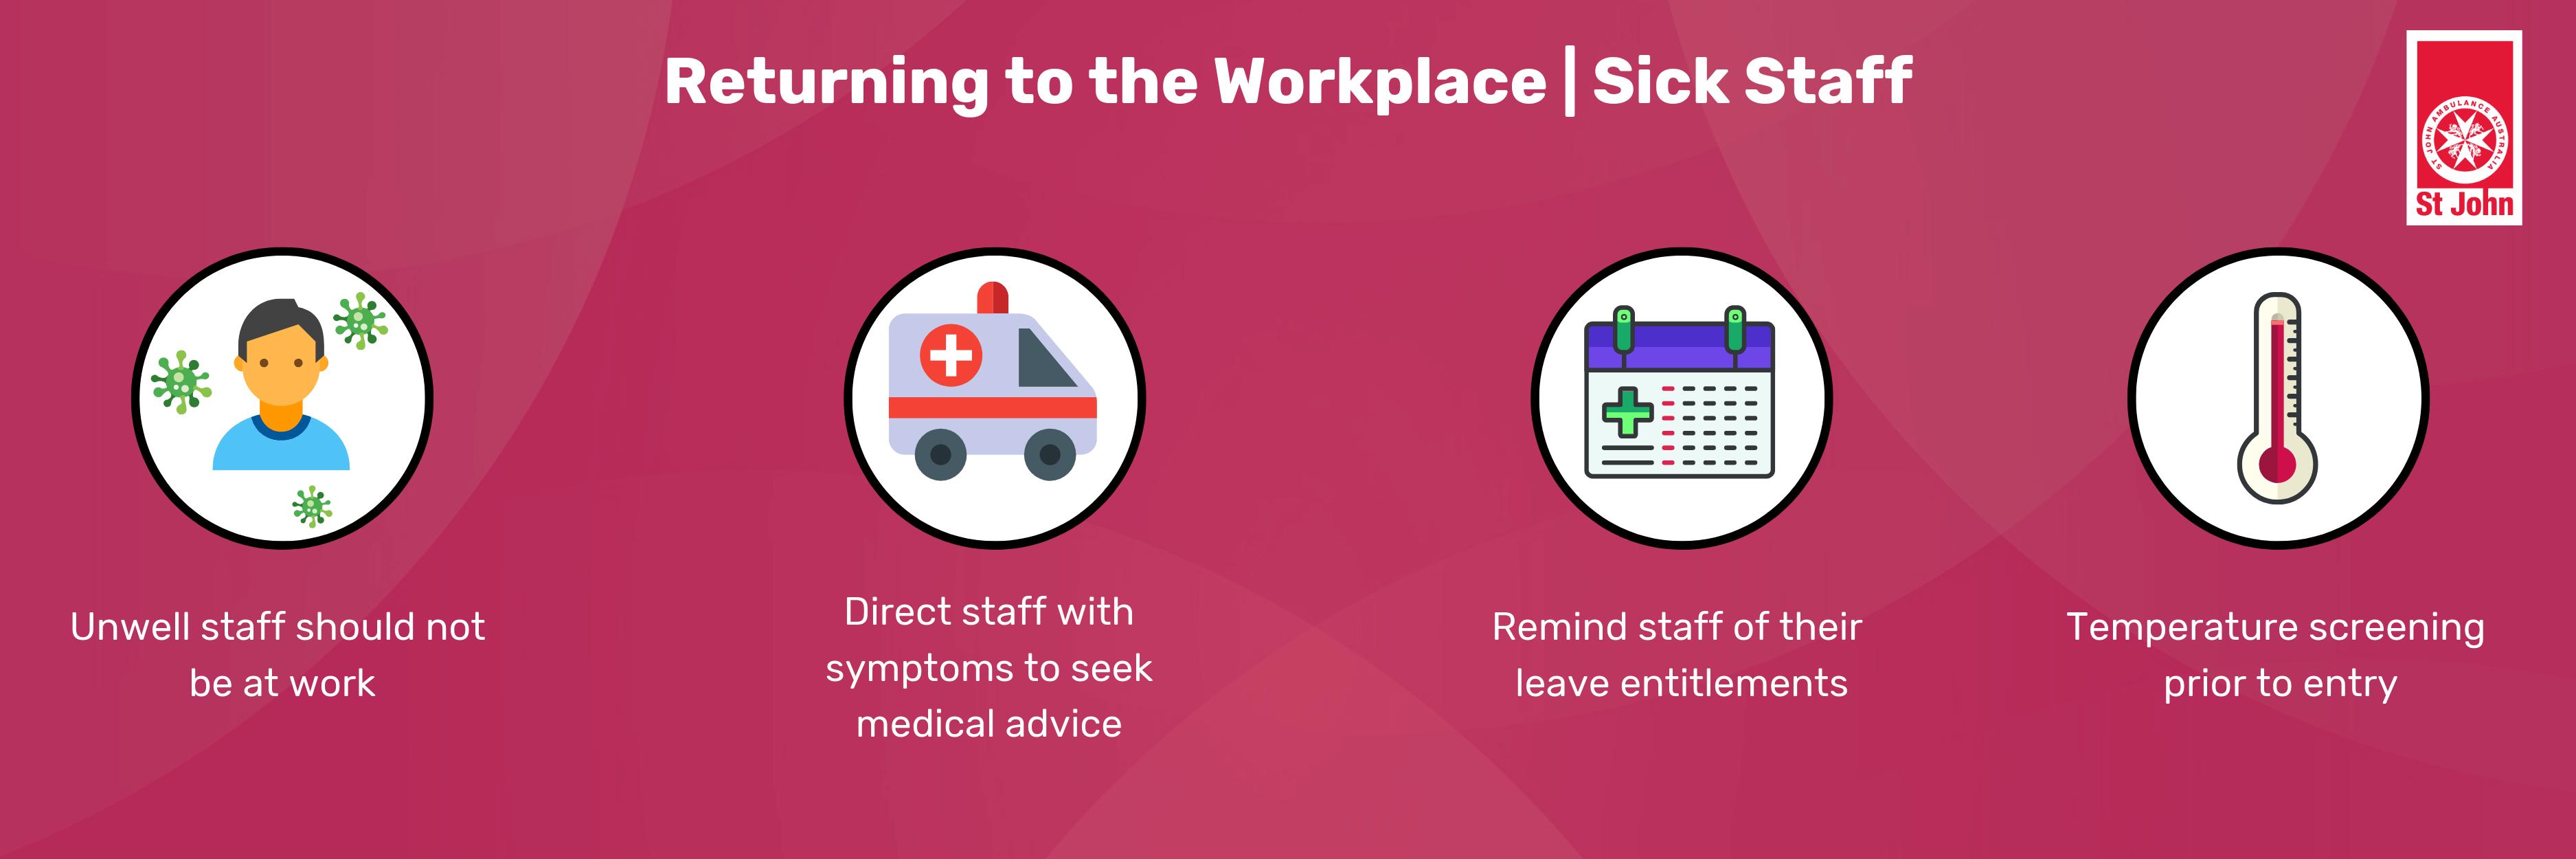 Returning to the Workplace During COVID-19 Sick or Unwell Staff Practices